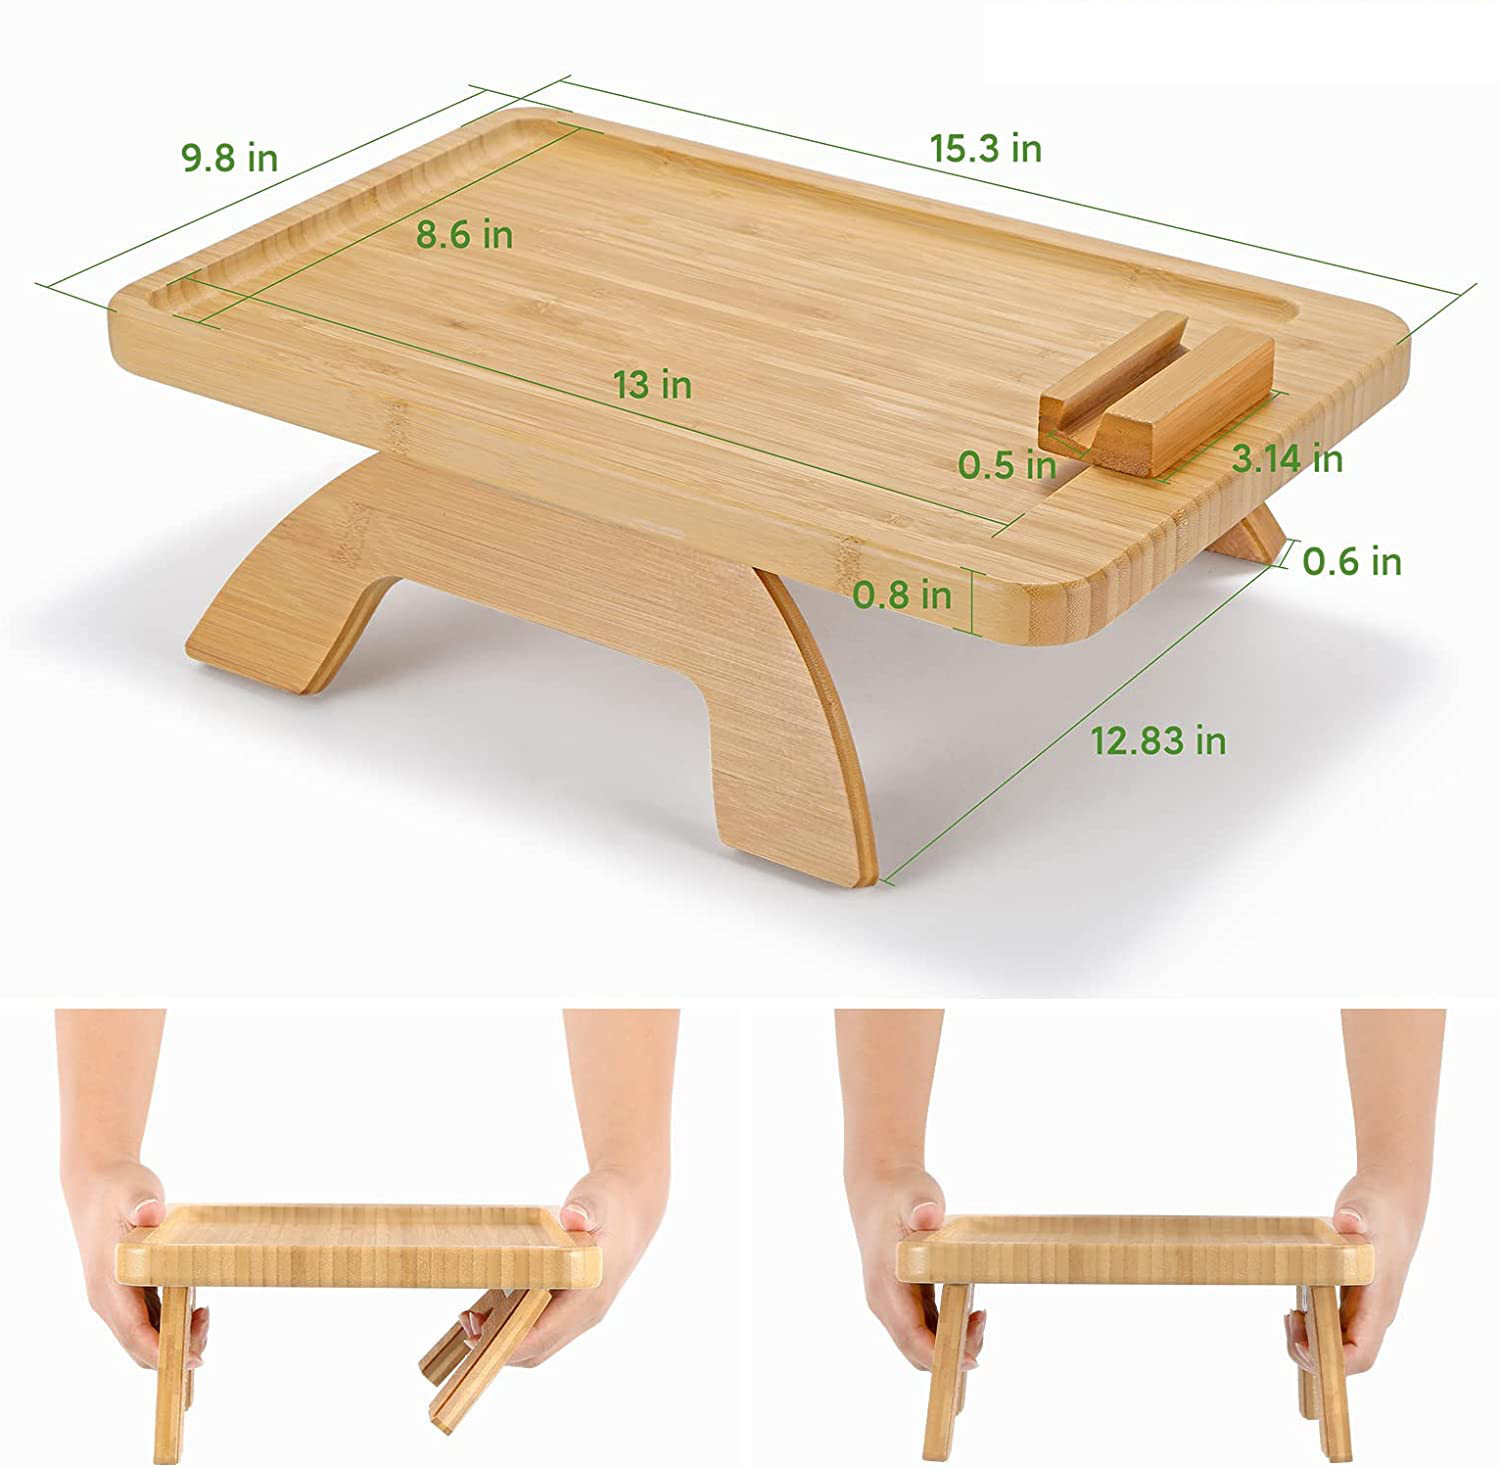 Bamboo Foldable Home Sofa Handrail Tray Table Home Decoration Picnic Outing Portable Storage Dinner Plate Table